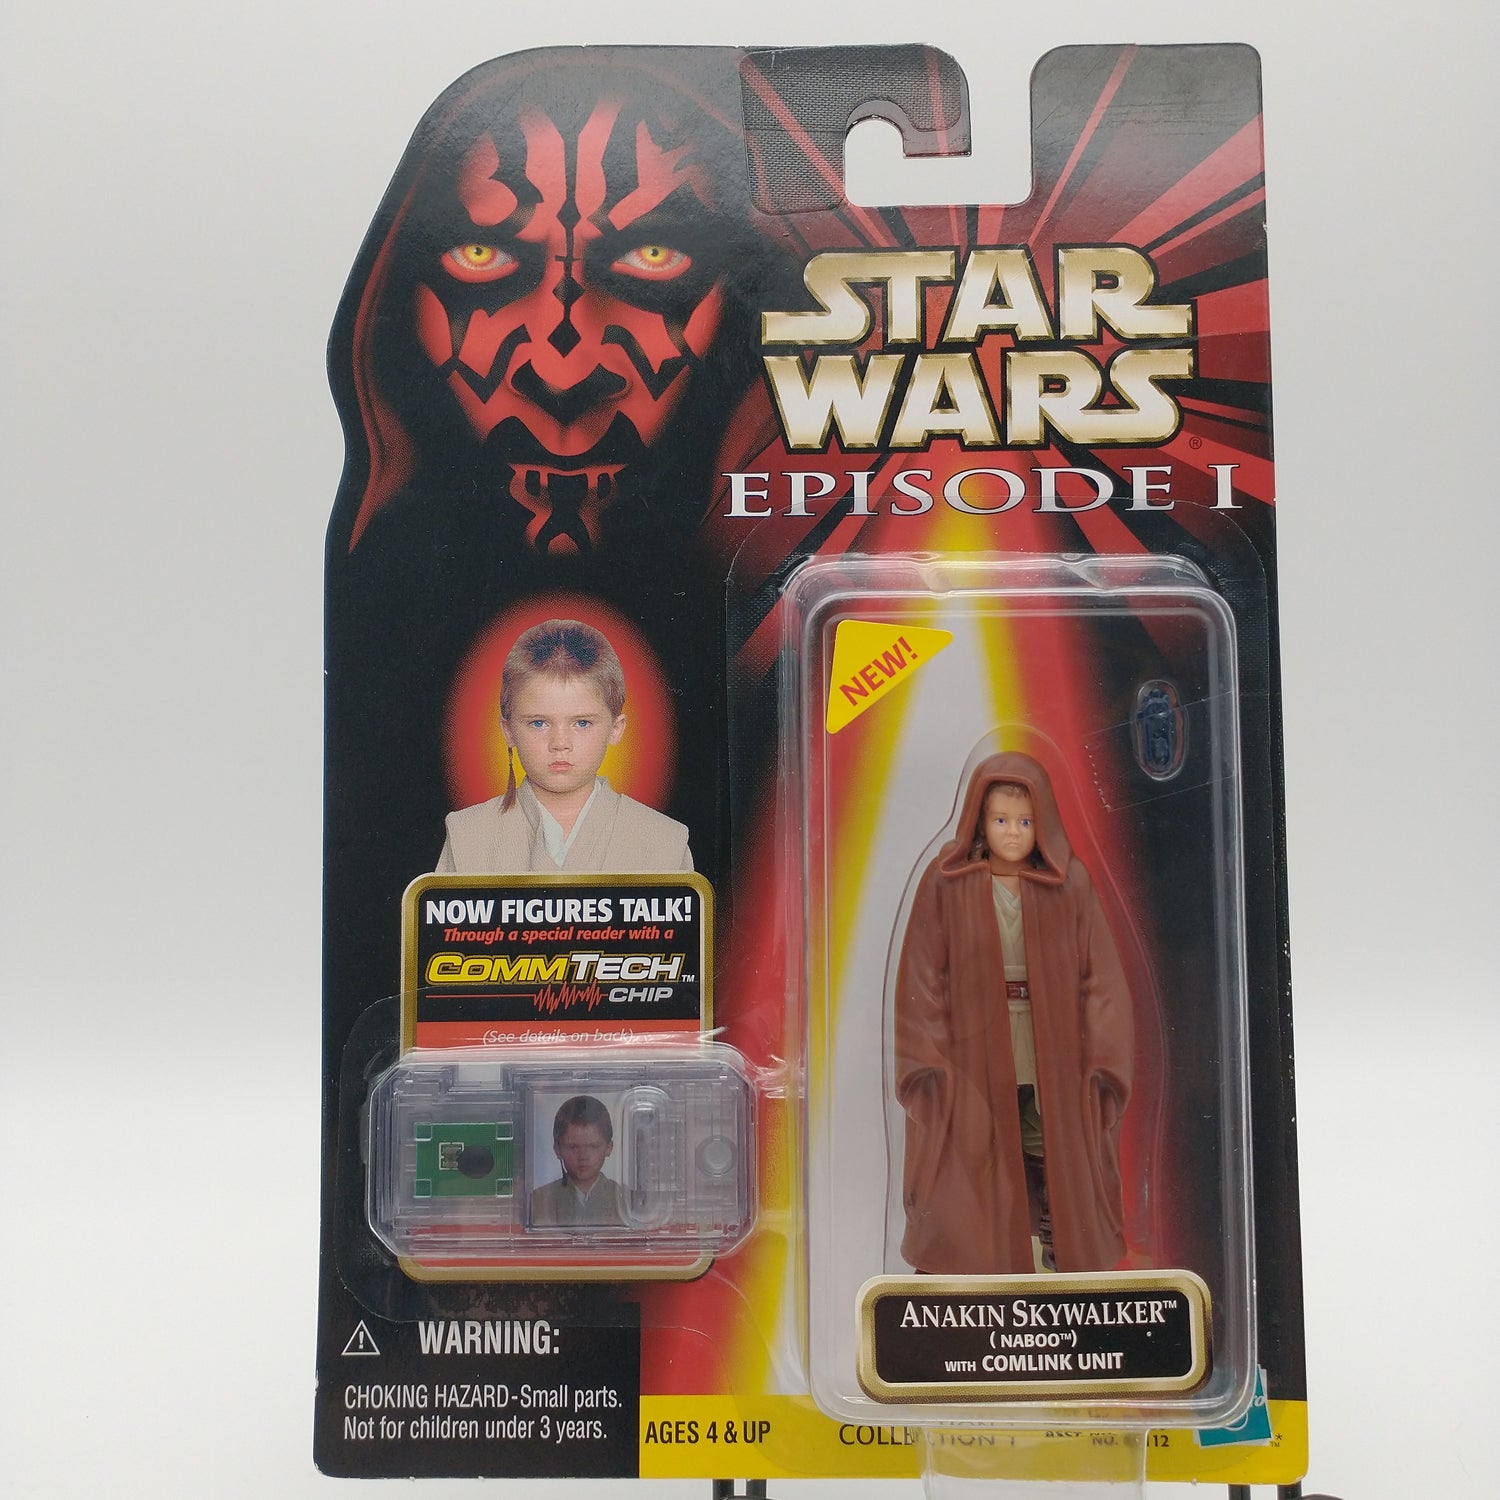 The front of the card and bubble is intact. The action figure inside is a small child wearing long brown robes. Next to him in a seperate bubble is the commtech chip.